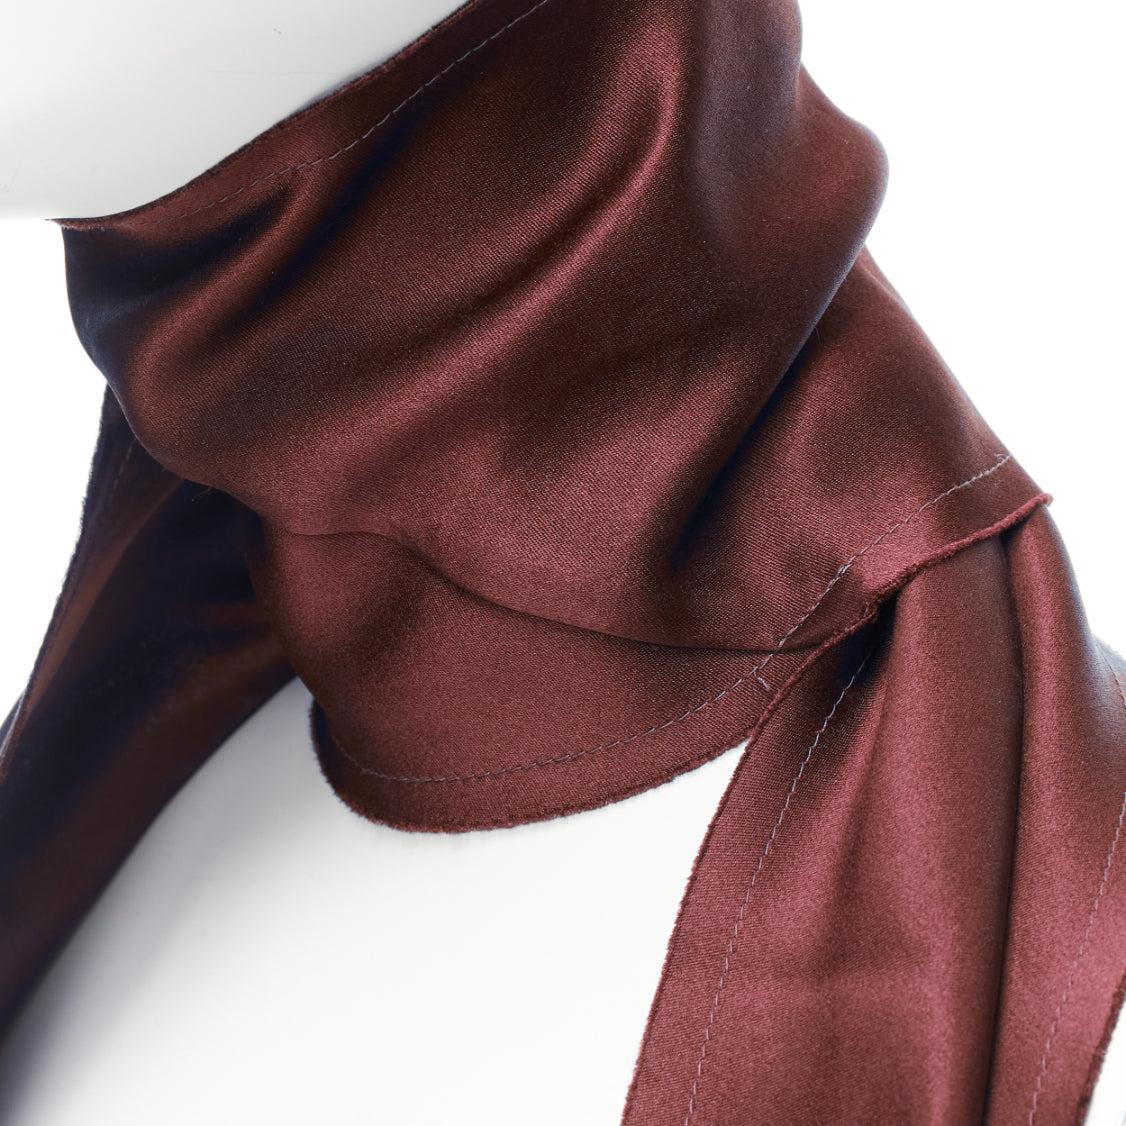 LANVIN red burgundy 100% silk made in france frayed edge rectangular scarf
Reference: CNLE/A00271
Brand: Lanvin
Designer: Alber Elbaz
Material: Silk
Color: Red
Pattern: Solid
Lining: Red Silk
Made in: France

CONDITION:
Condition: Excellent, this